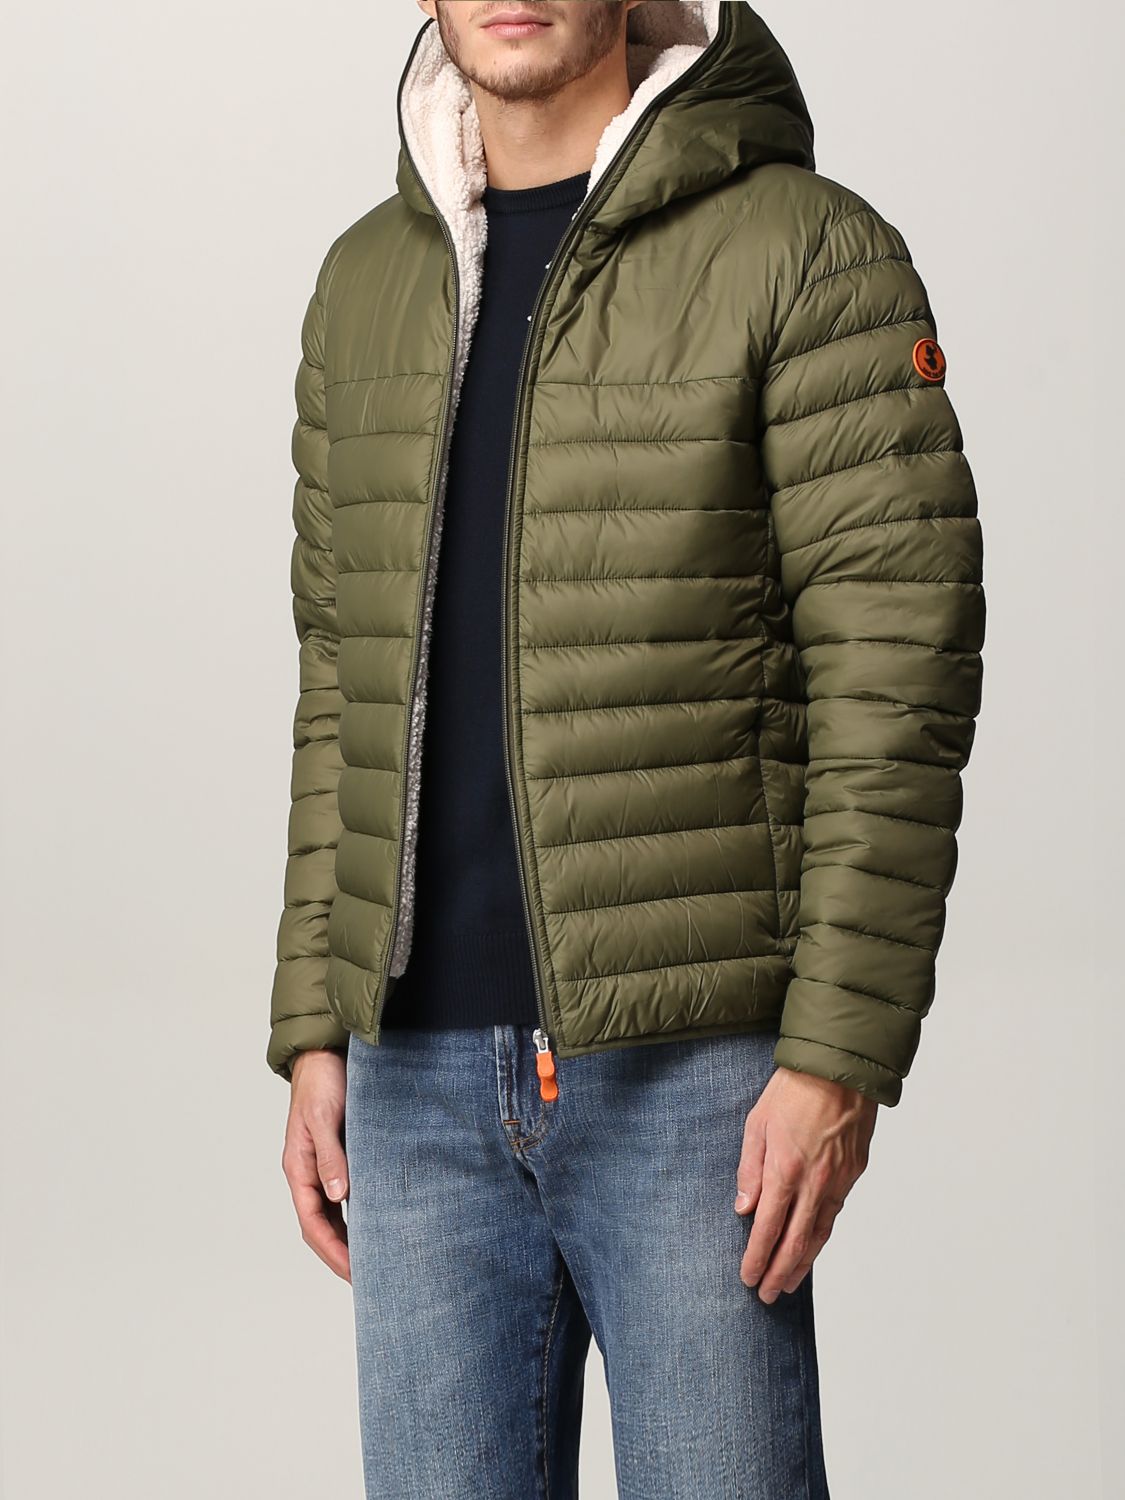 Jacket Save The Duck: Save The Duck jacket for men green 3